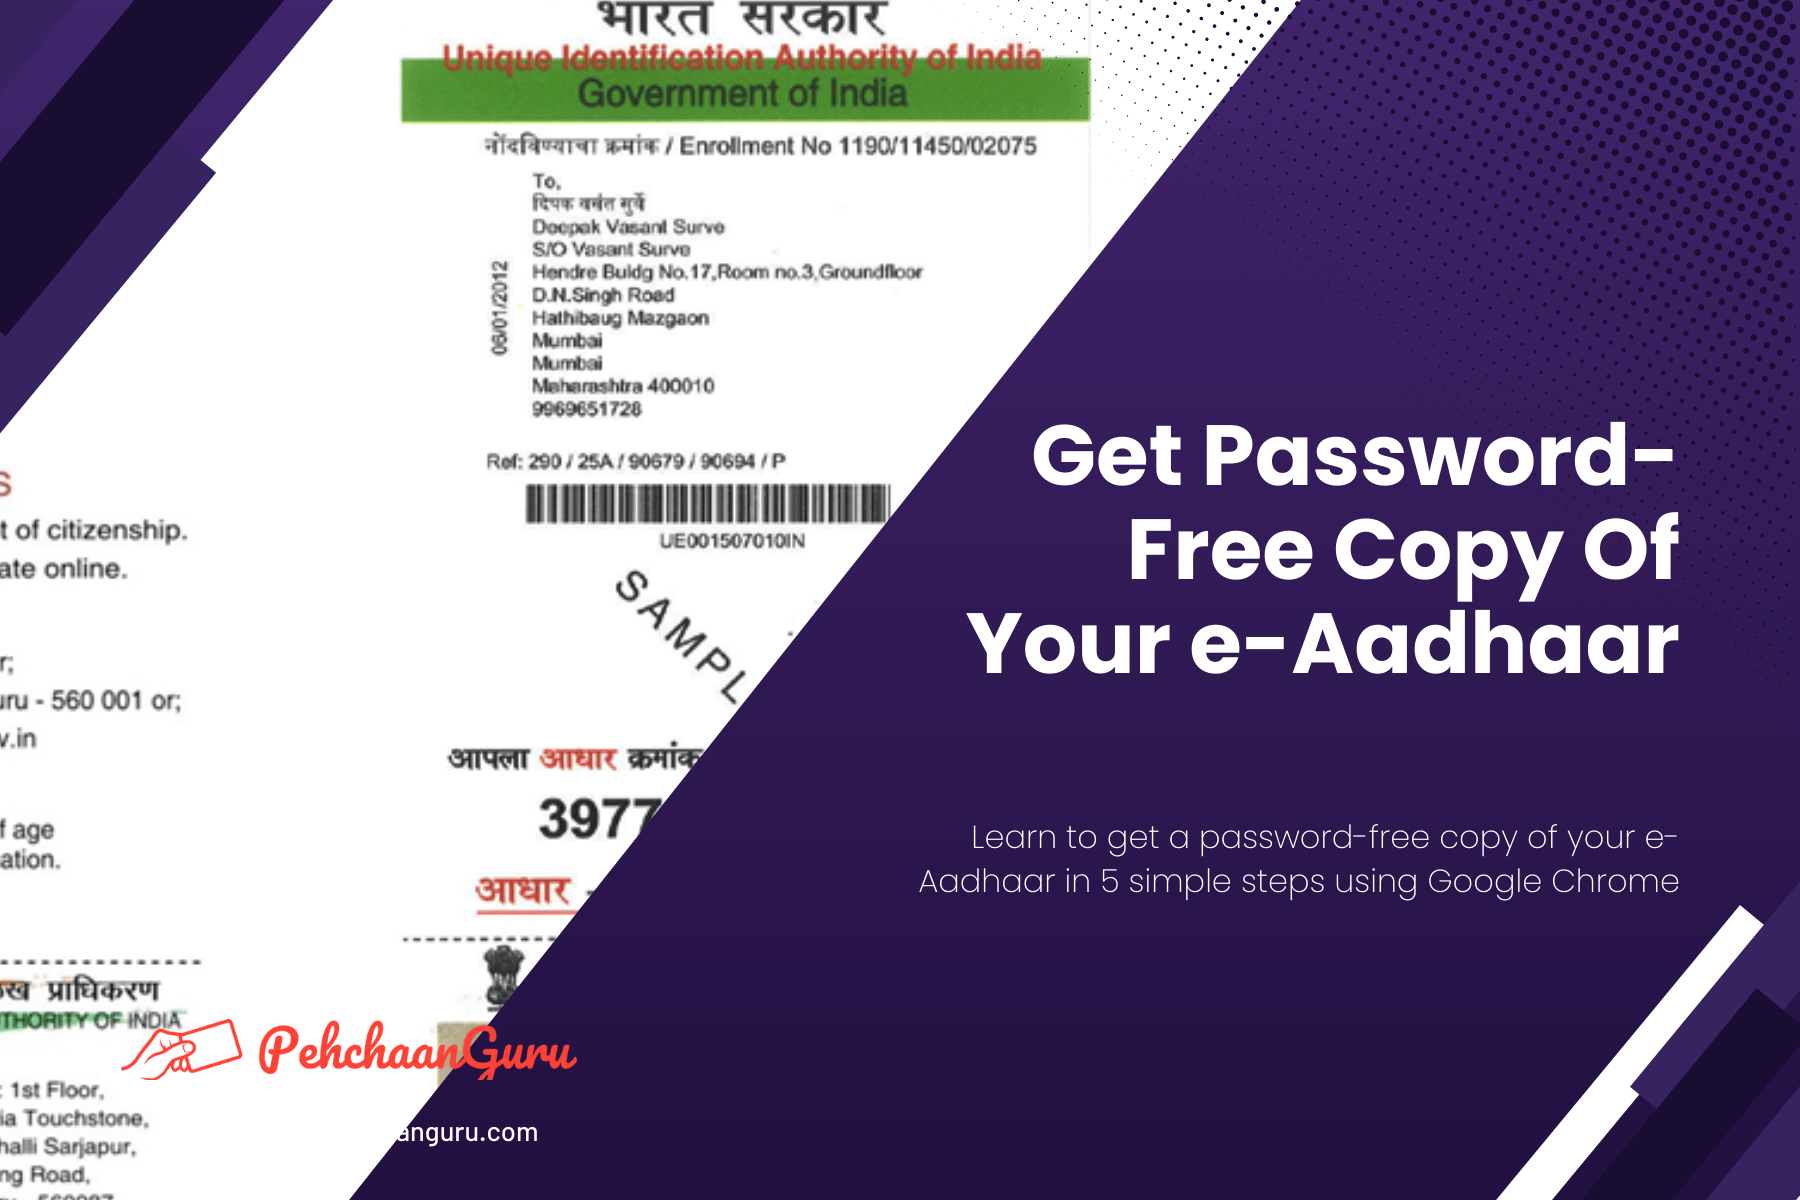 How To Remove The Password & Save Password-Free Copy Of Your e-Aadhaar Using Google Chrome